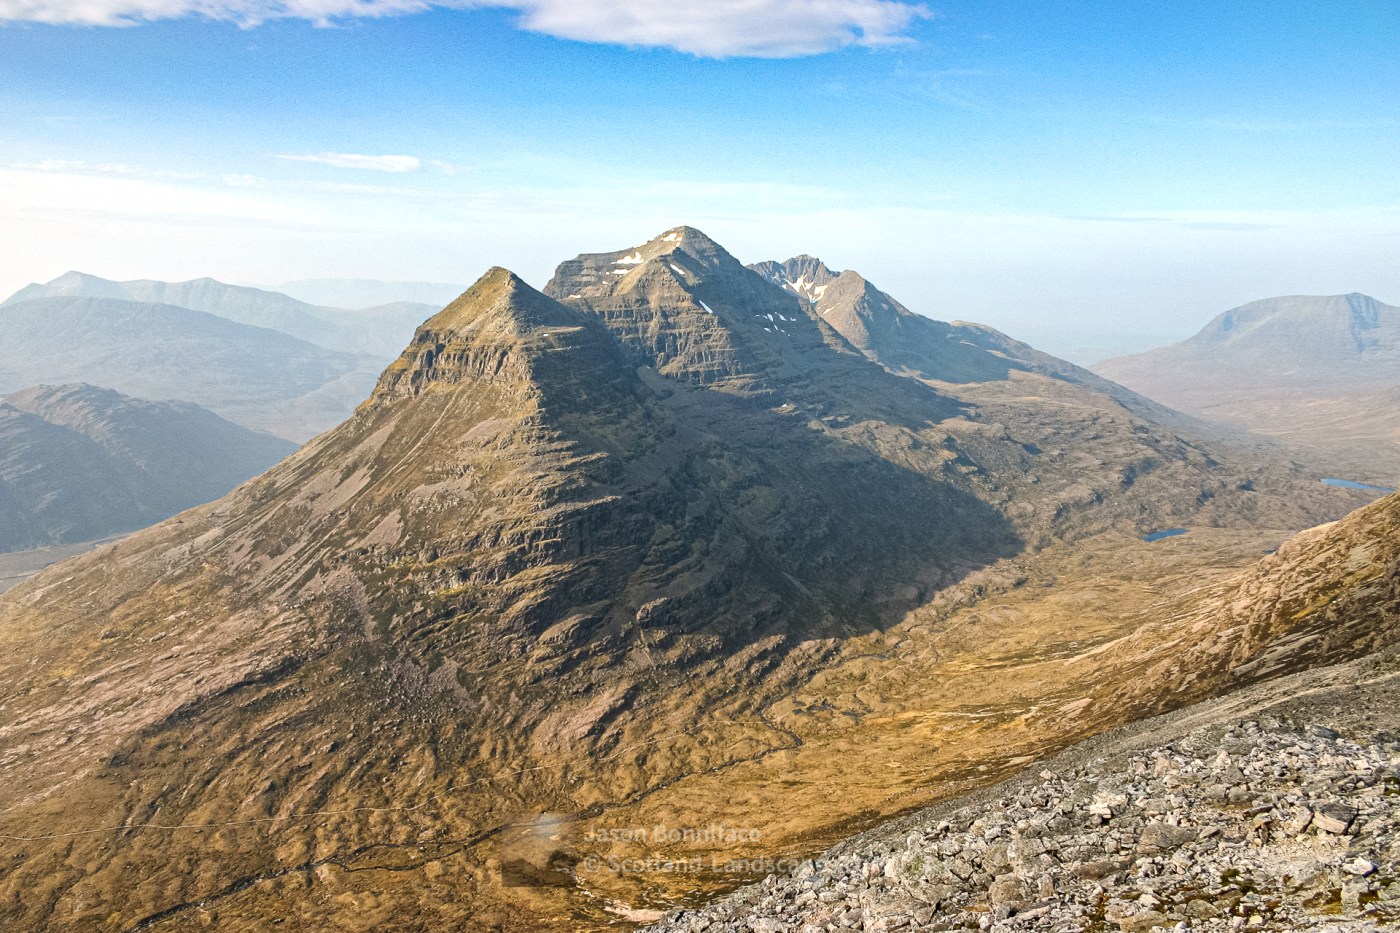 Photo of the mighty Torridon peak of Liathach seen to good effect from the western ridge of Spidean Coire nan Clach, Beinn Eighe